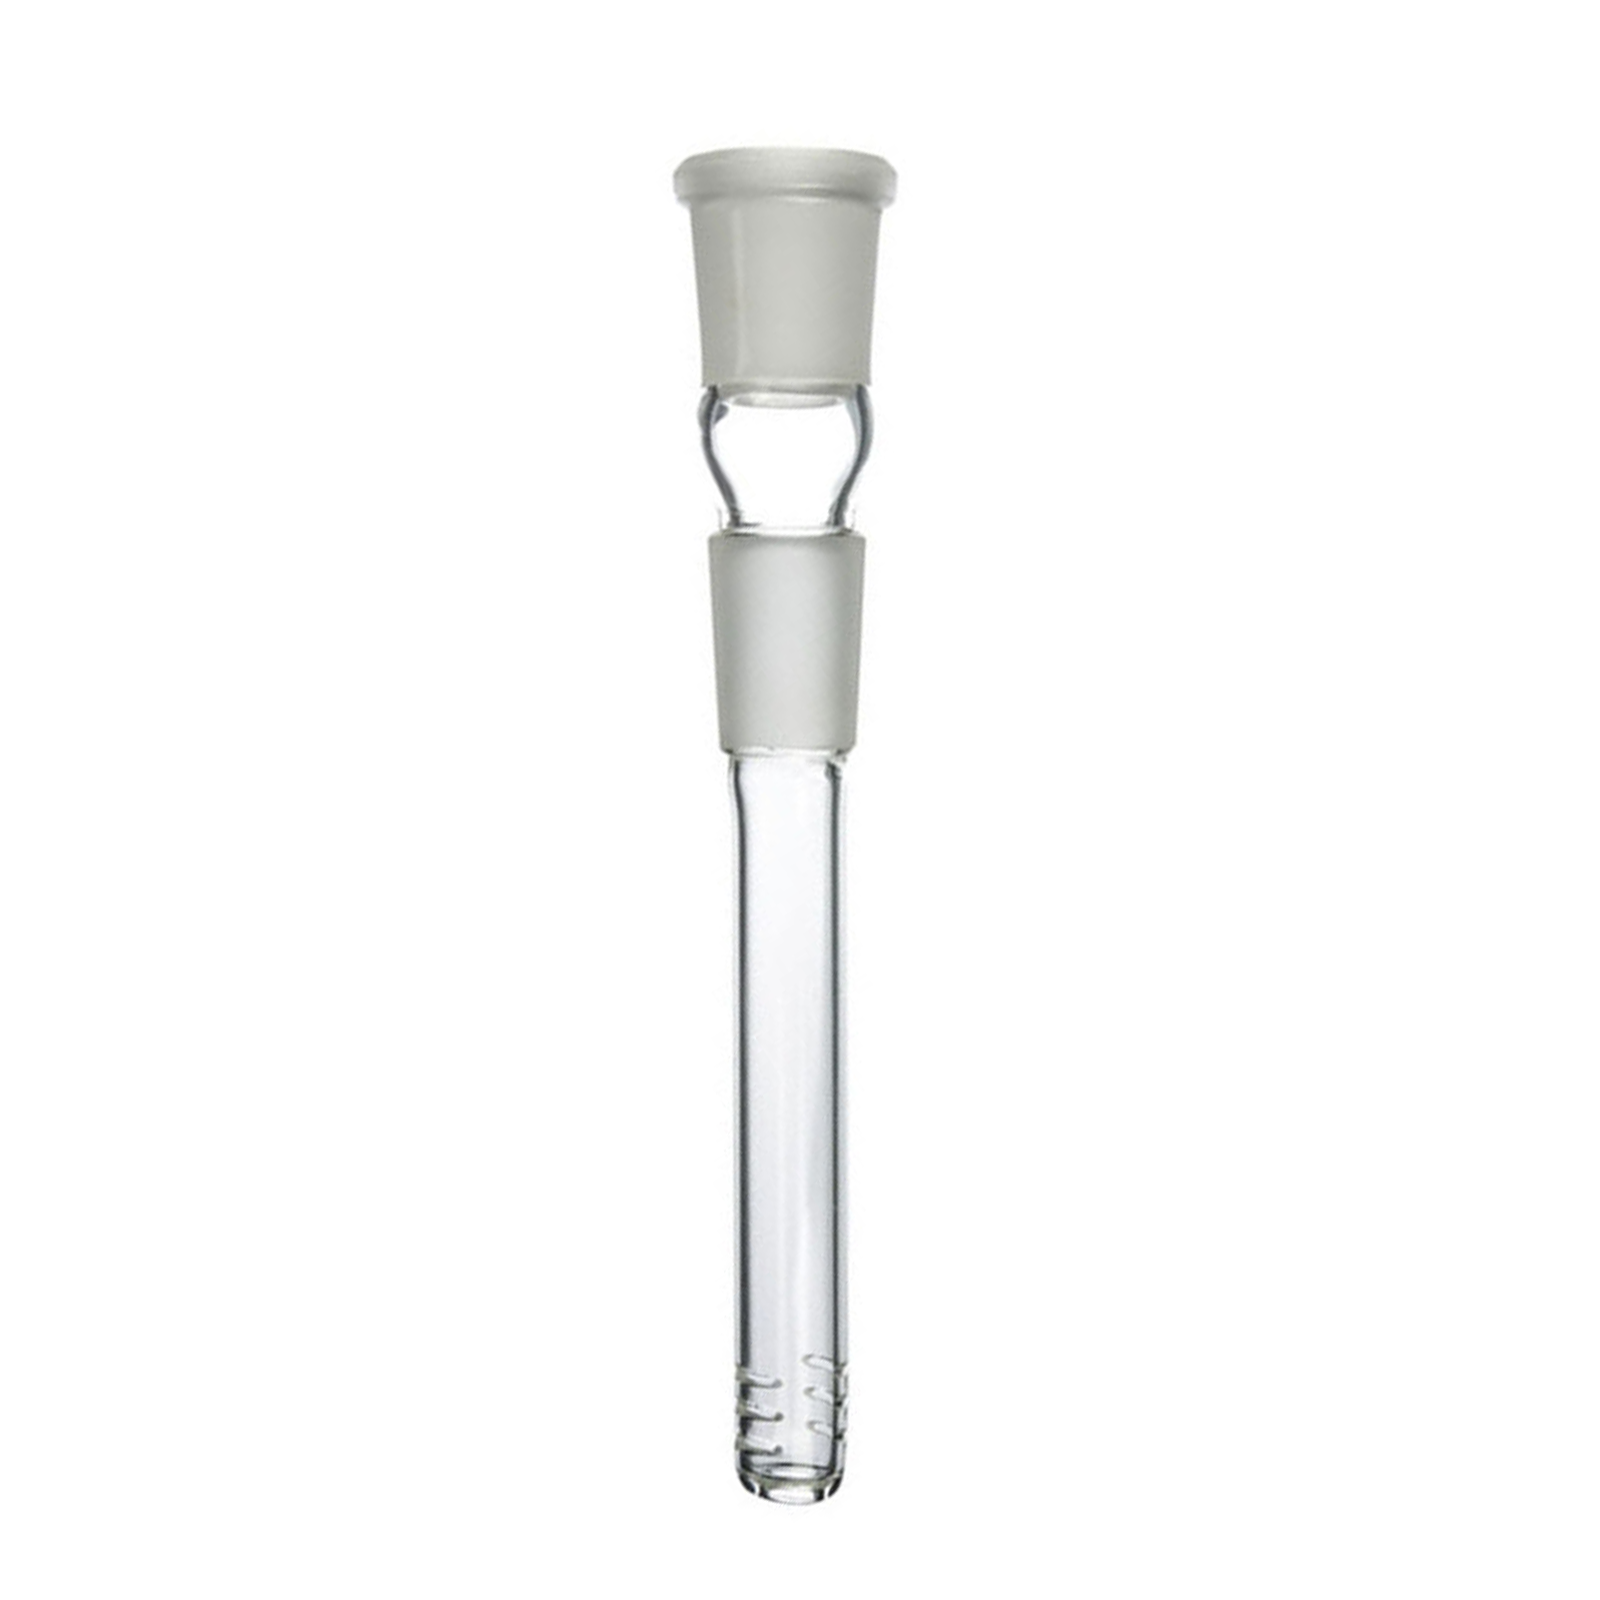 19mm Male to Female Diffused Downstem  - INHALCO